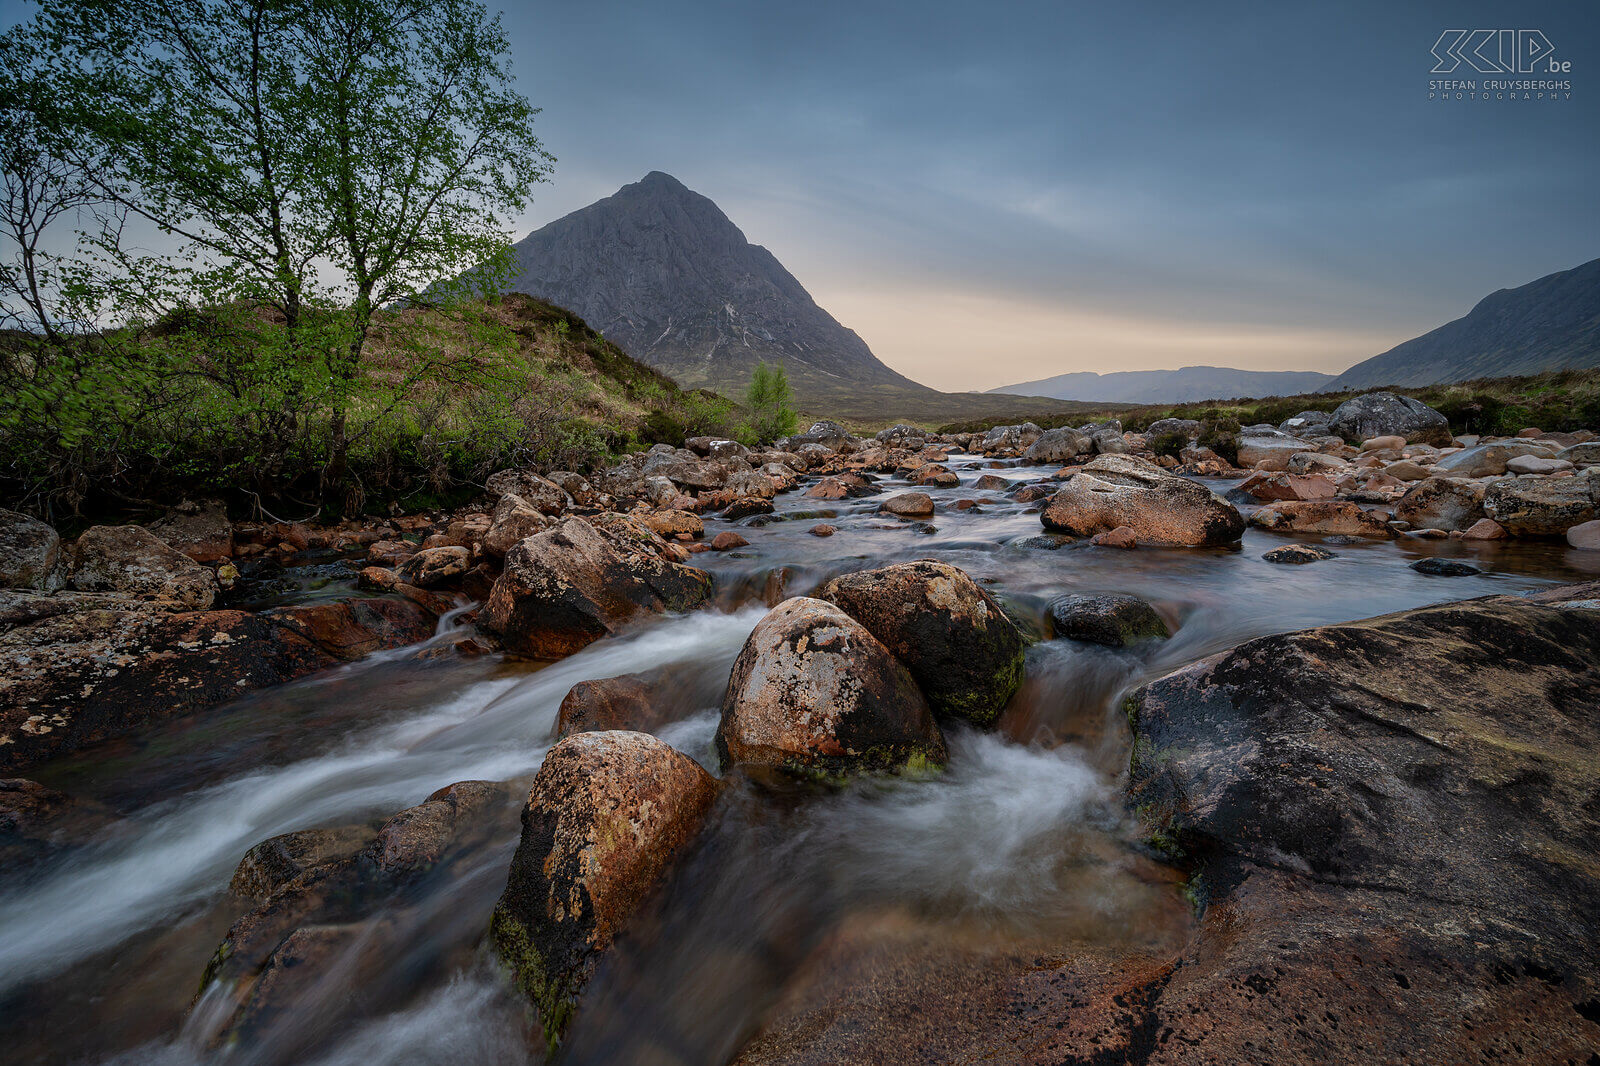 Glen Coe - River Coupall Waterfalls on the River Coupall with a view of the Buachaille Etive Mòr in the Glen Coe valley. Stefan Cruysberghs